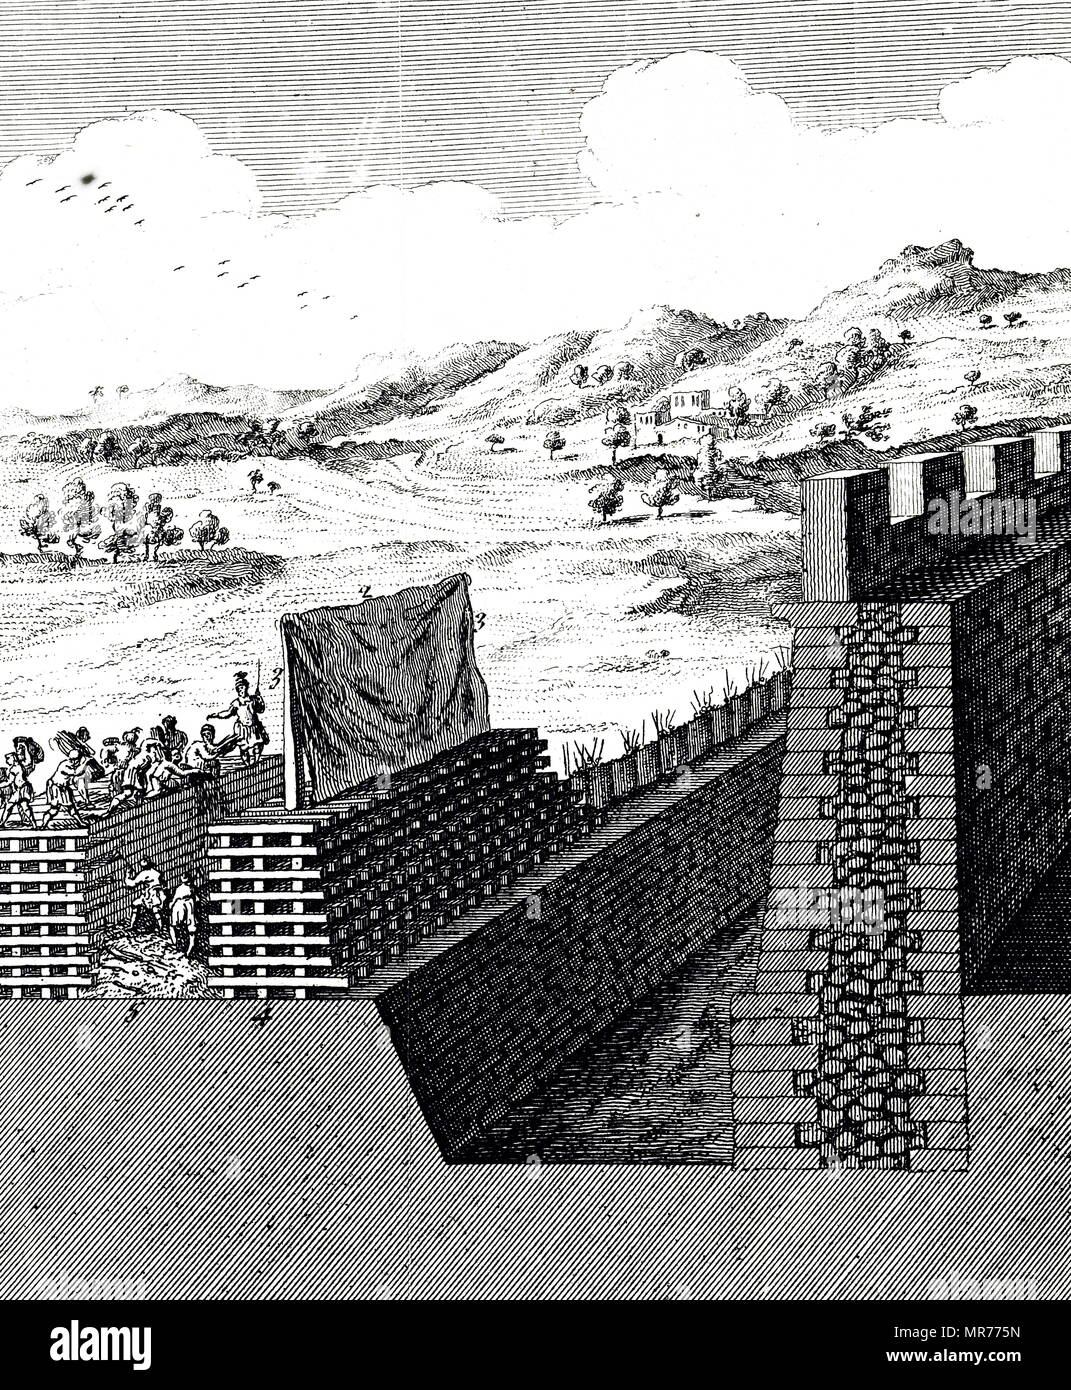 Engraving depicting the construction of an ancient Roman siege platform. Engraved by William Henry Toms (1700-1765) an English engraver. Dated 18th century Stock Photo